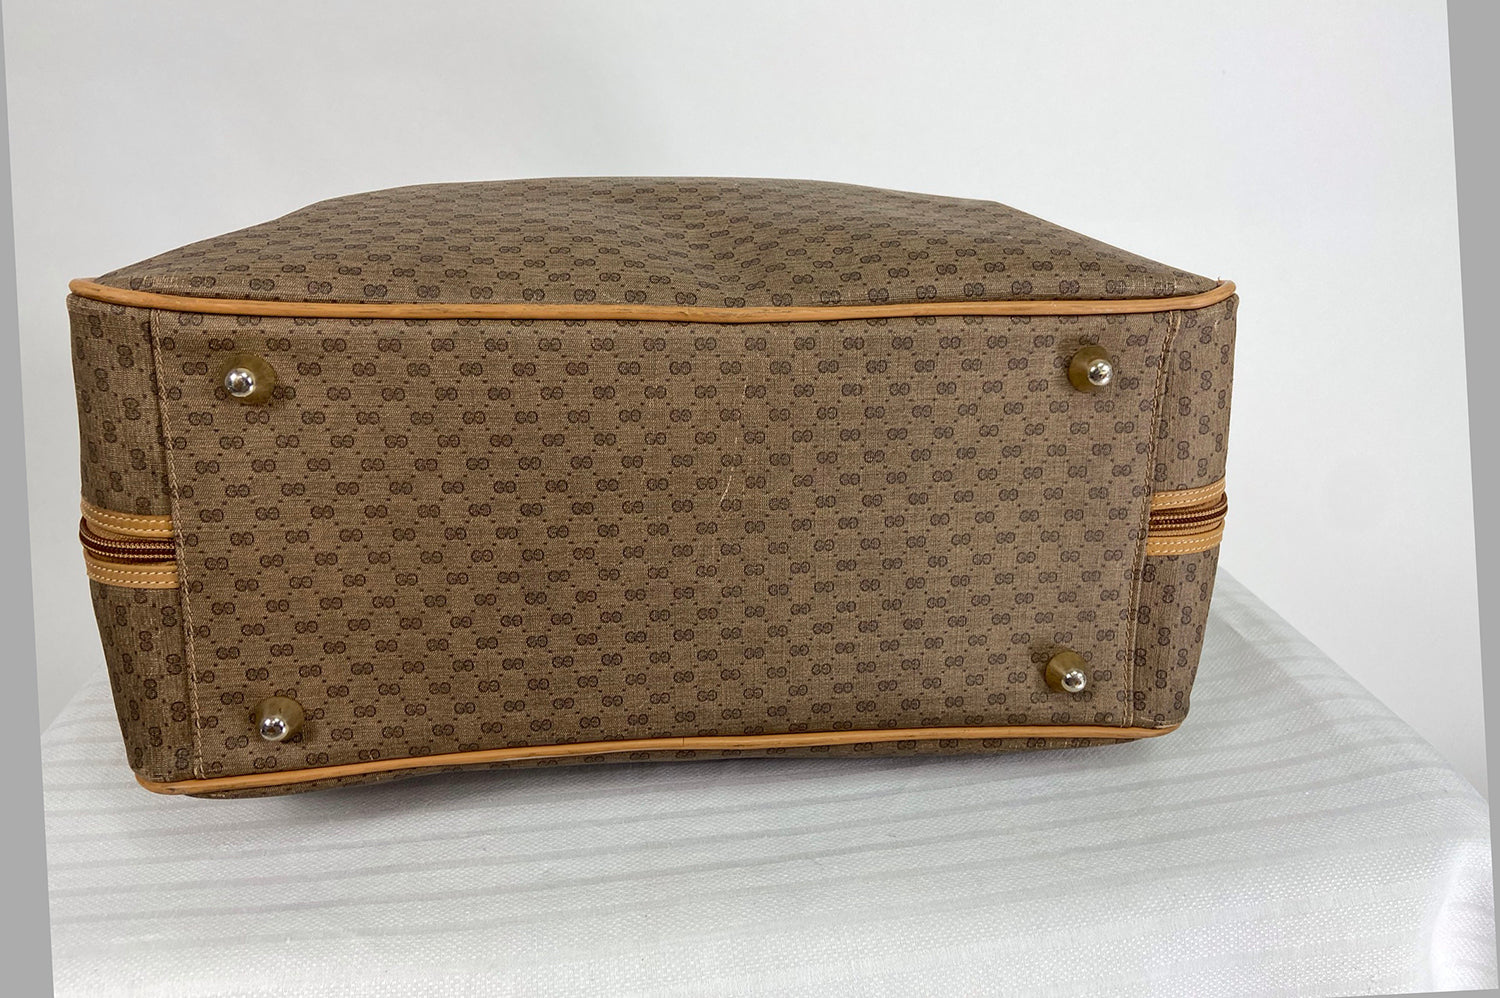 Vintage Gucci Carry On Luggage With Monogram Print